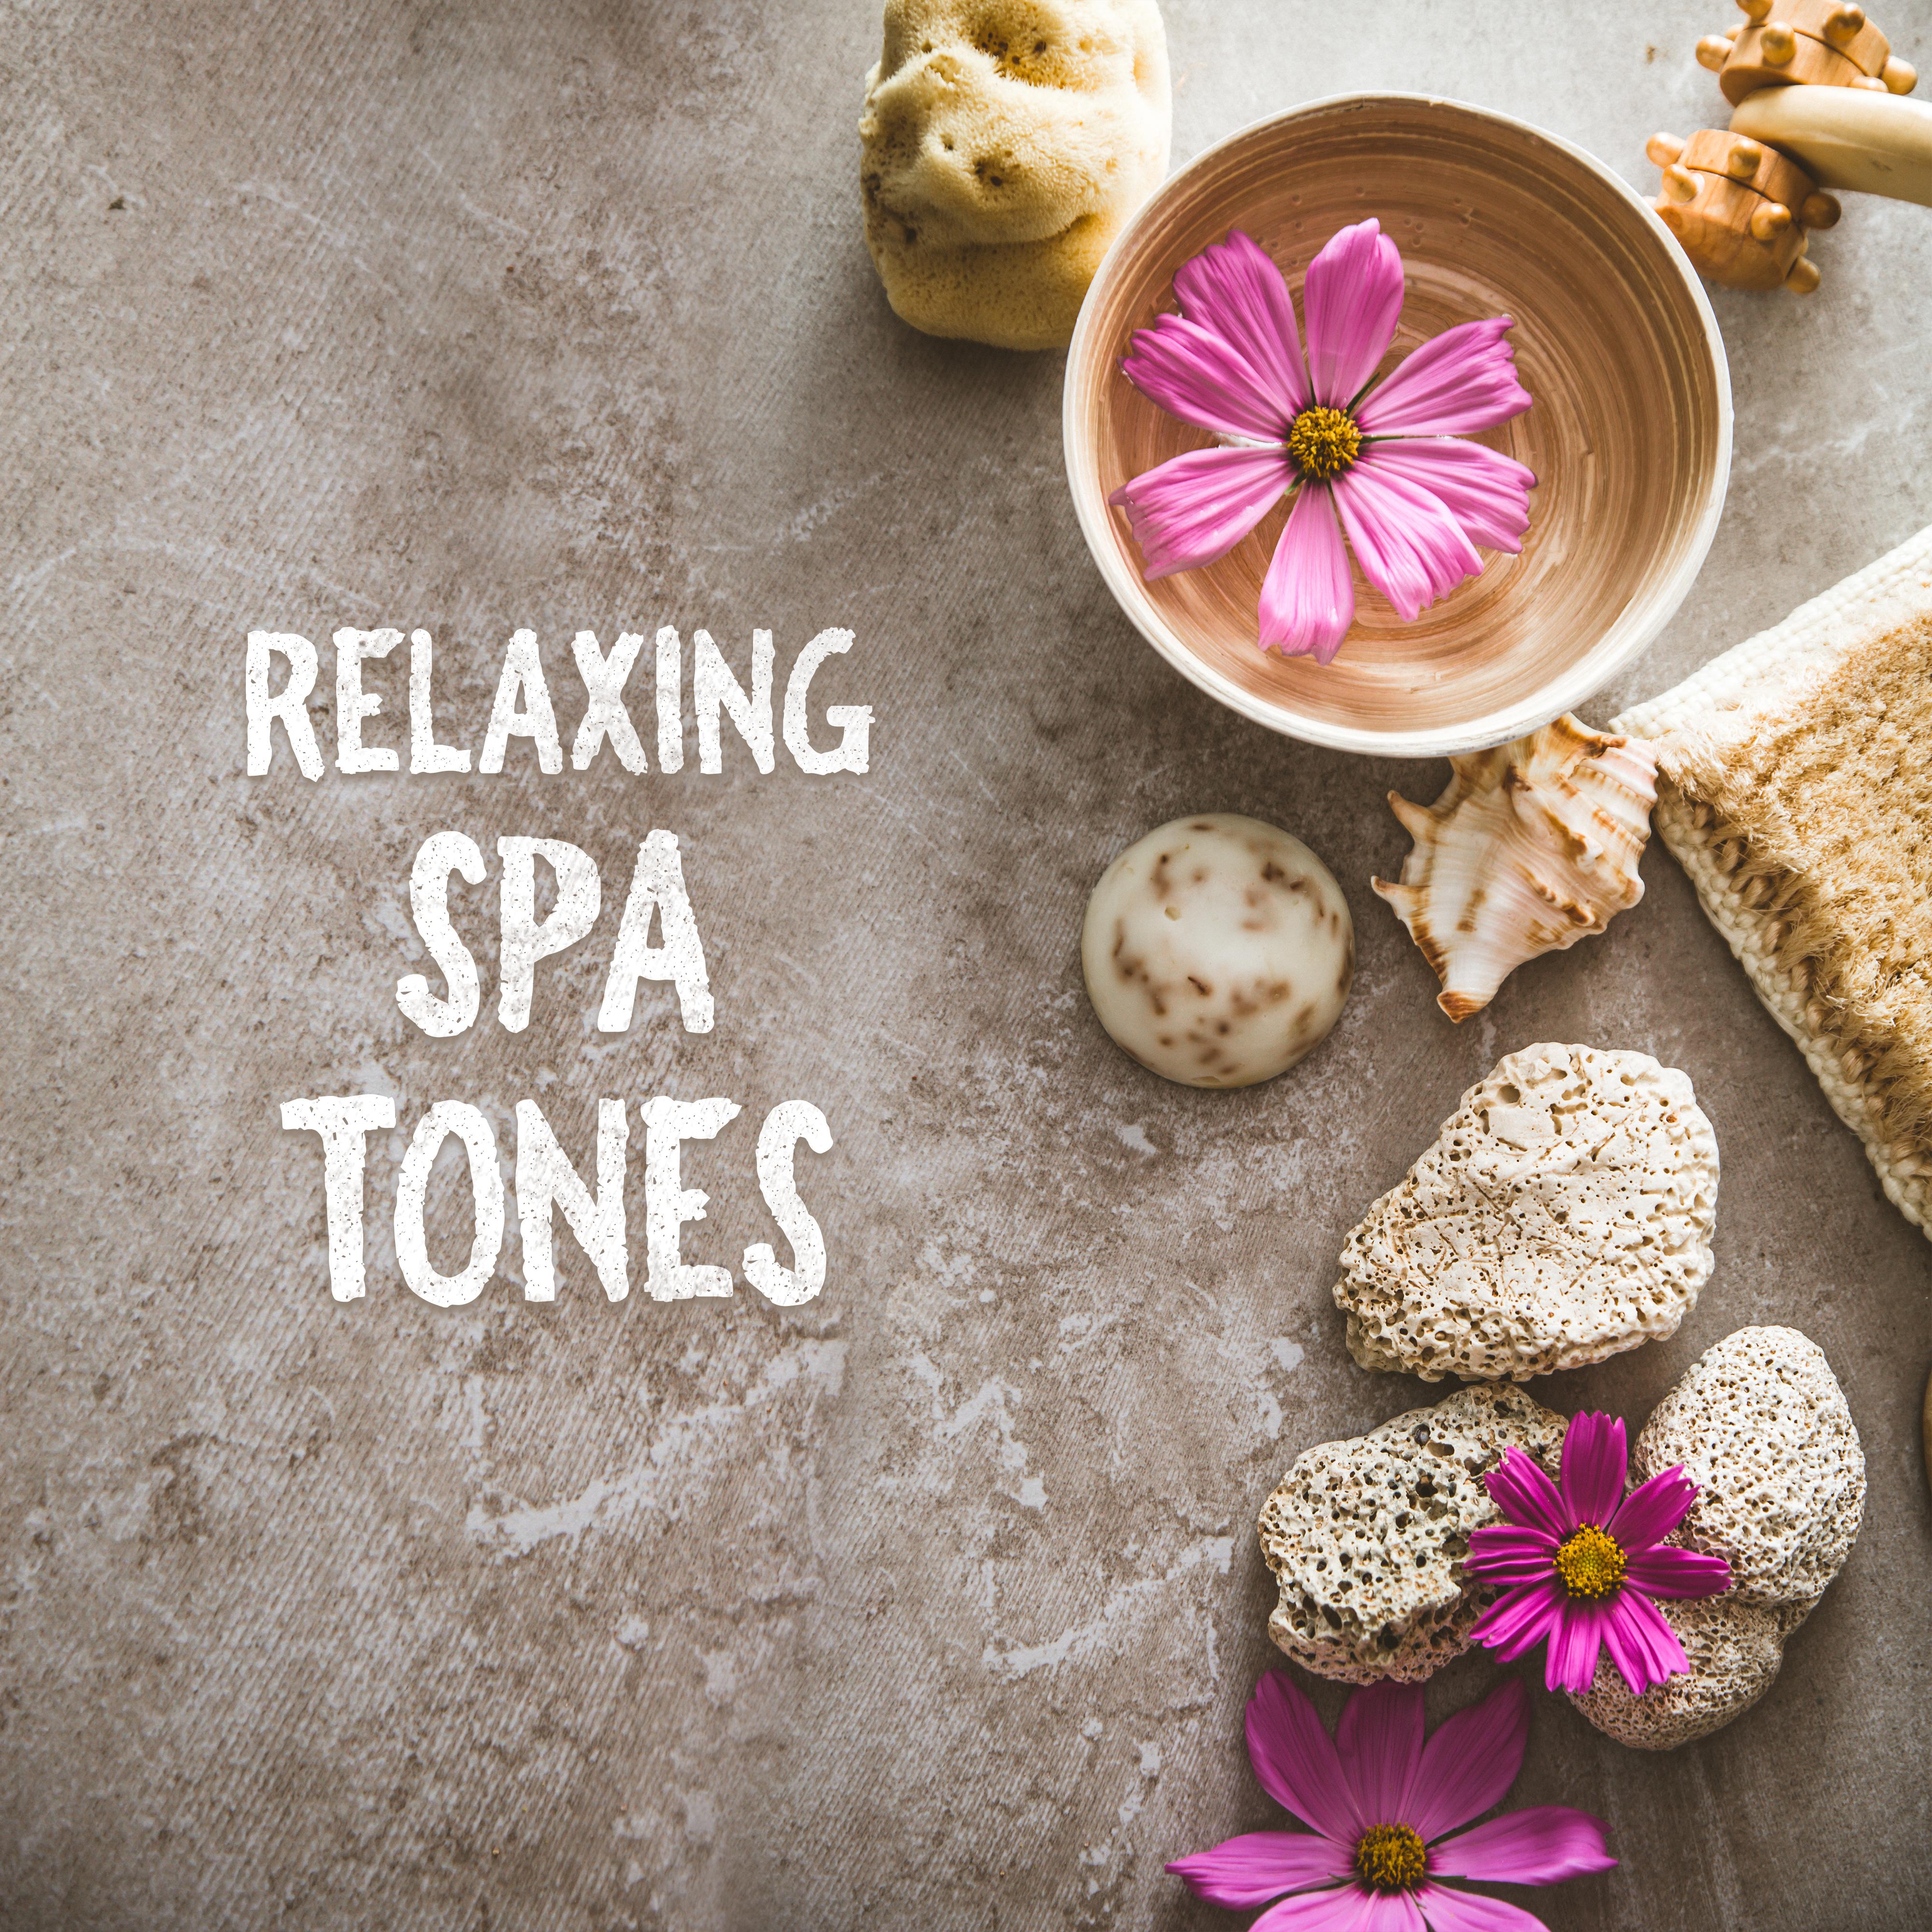 Relaxing Spa Tones  Healing Therapy, Wellness Music, Stress Relief, New Age Music for Massage, Spa, Relaxation, Sleep, Inner Harmony